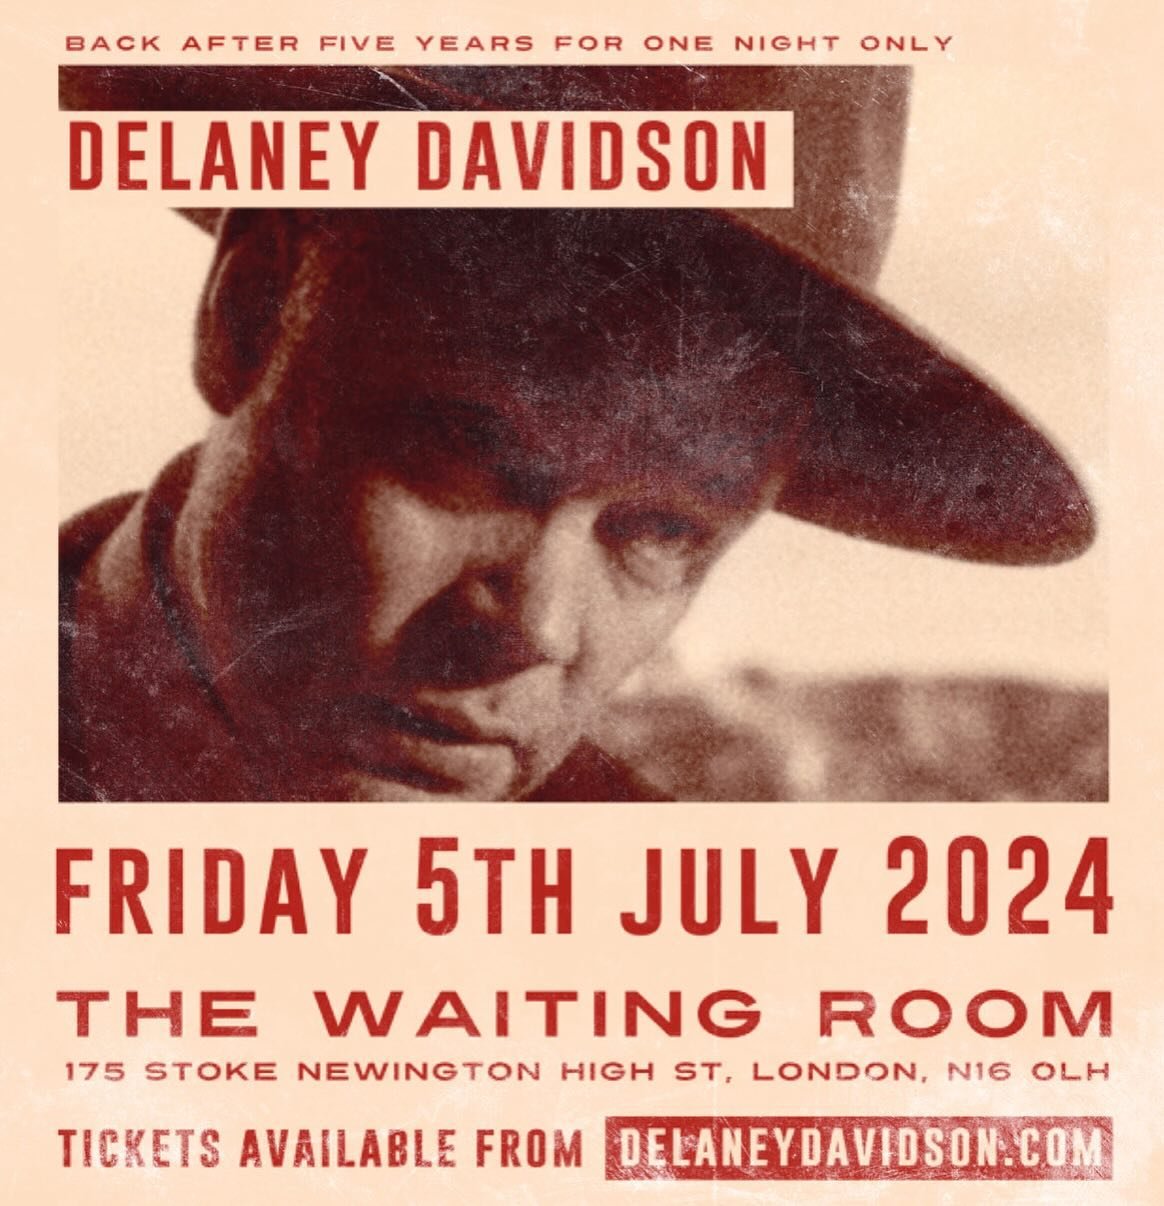 July 5. Wow! London show!! Tickets on website friends! Has it really been 5 years?!? #delaneydavidsonlive #ddtour